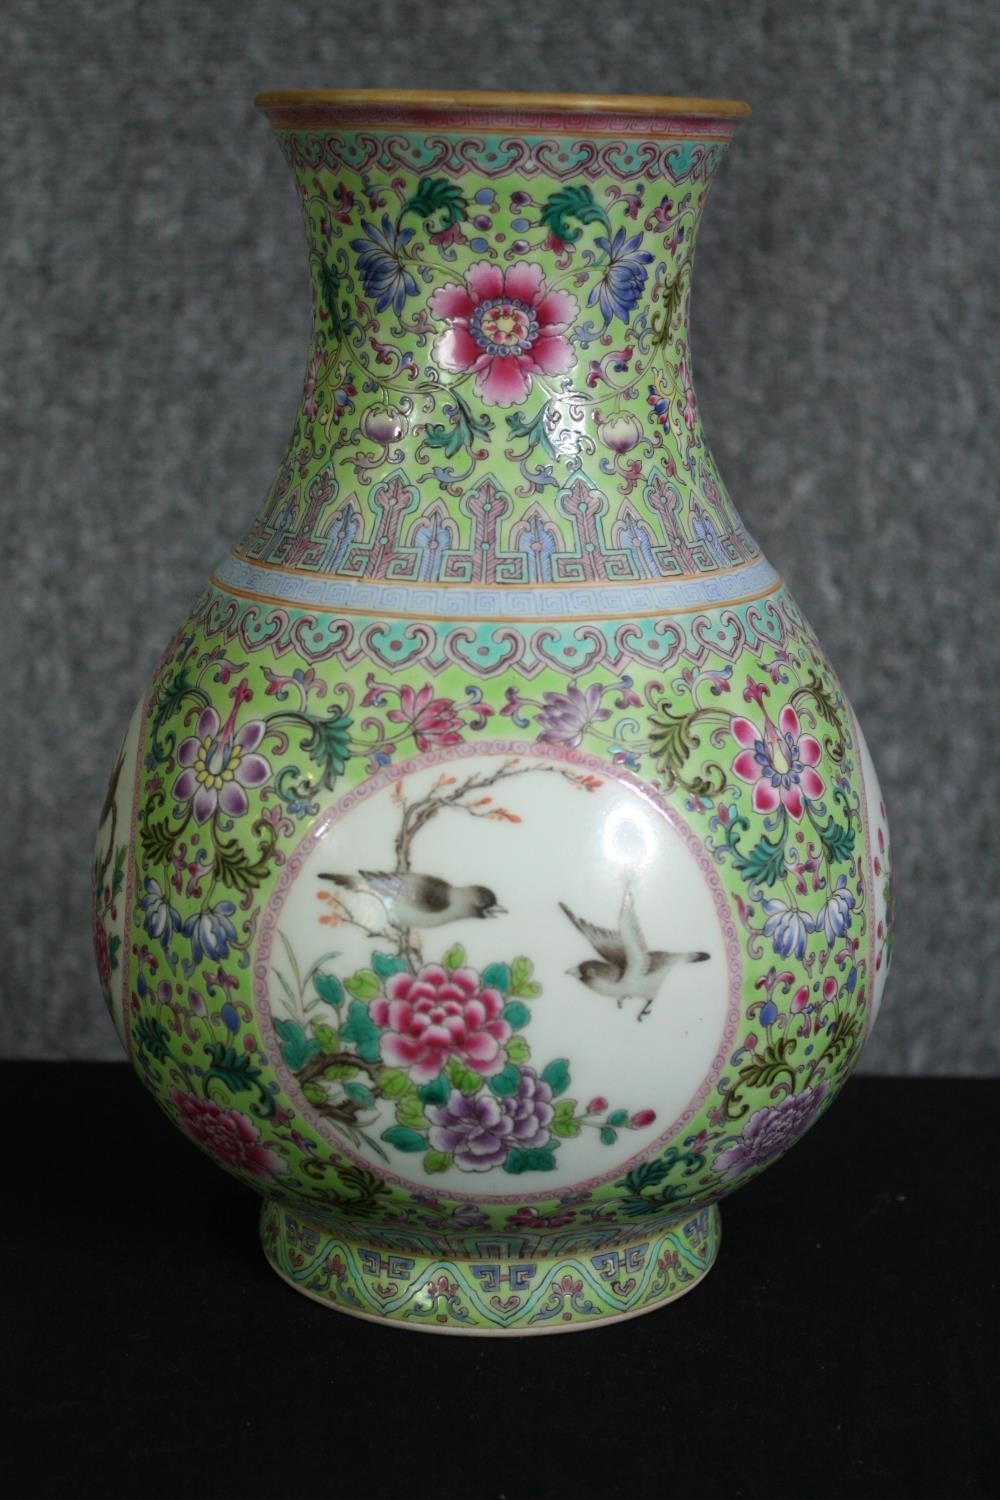 An early 20th century Famille rose hand painted porcelain vase with celadon glaze interior and base.